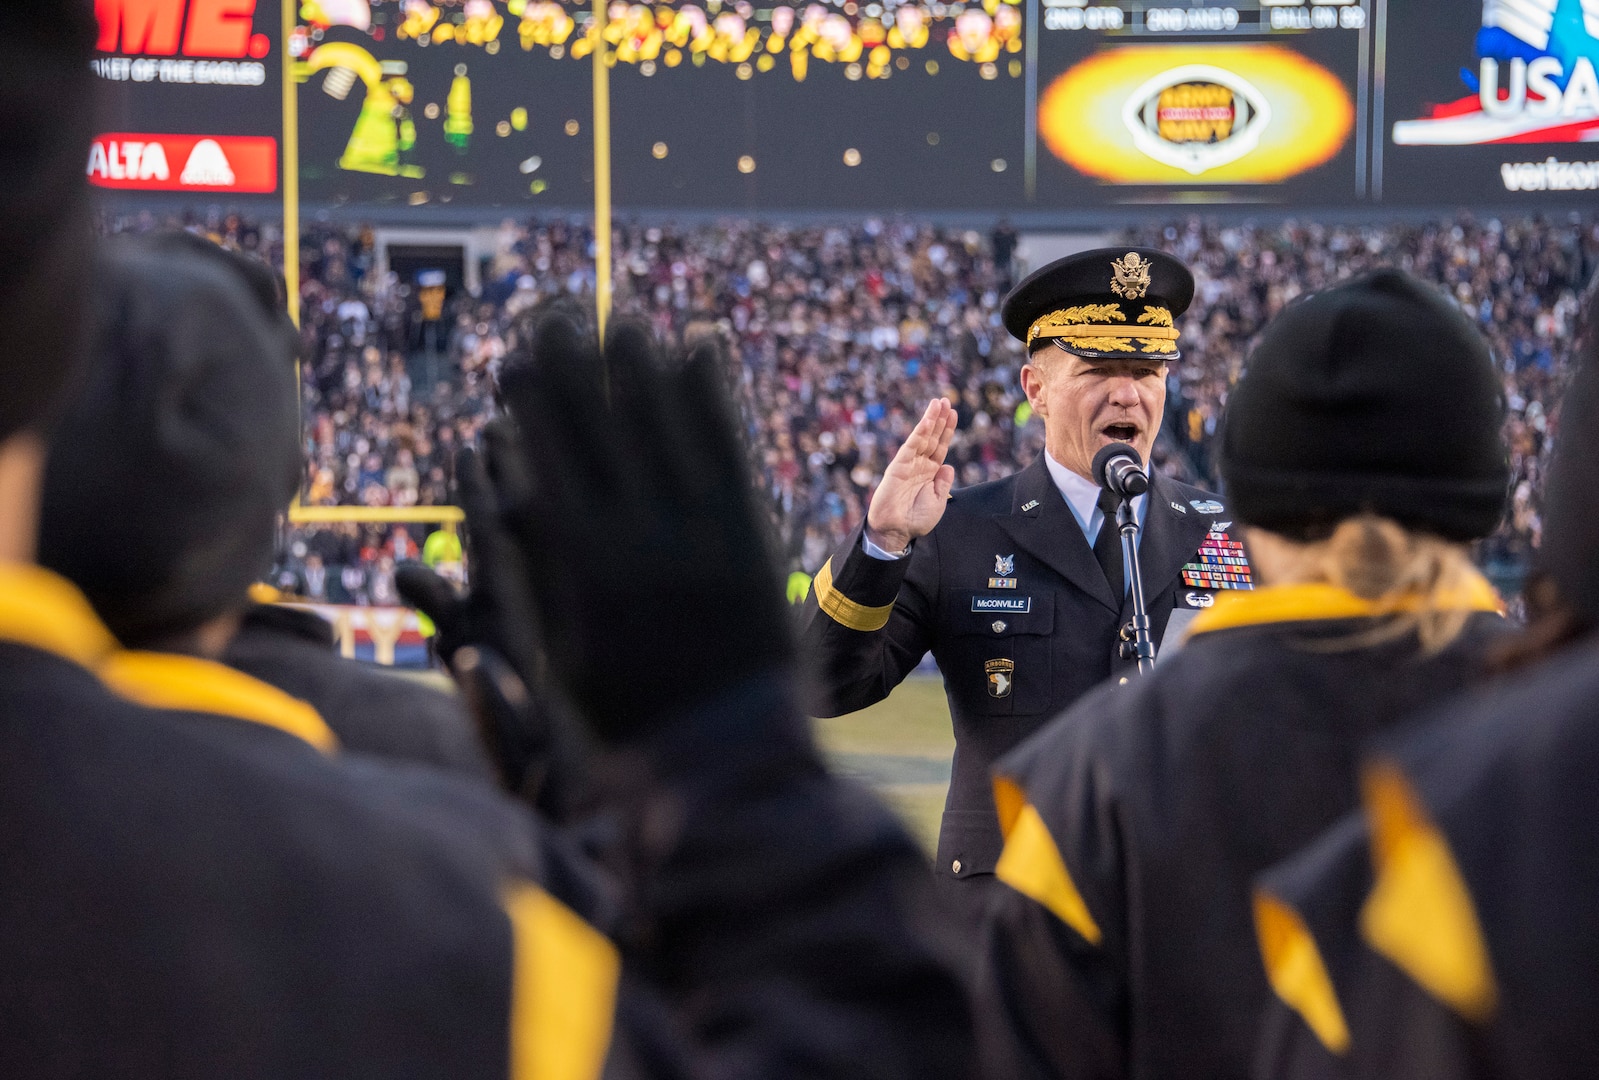 Gen. James McConville, the Army vice chief of staff, swears in recruits during a break in the Army-Navy football game in Philadelphia, Dec. 8, 2018. McConville, who was sworn in as the Army's 40th chief of staff on Aug. 9, 2019, graduated from the U.S. Military Academy in 1981.